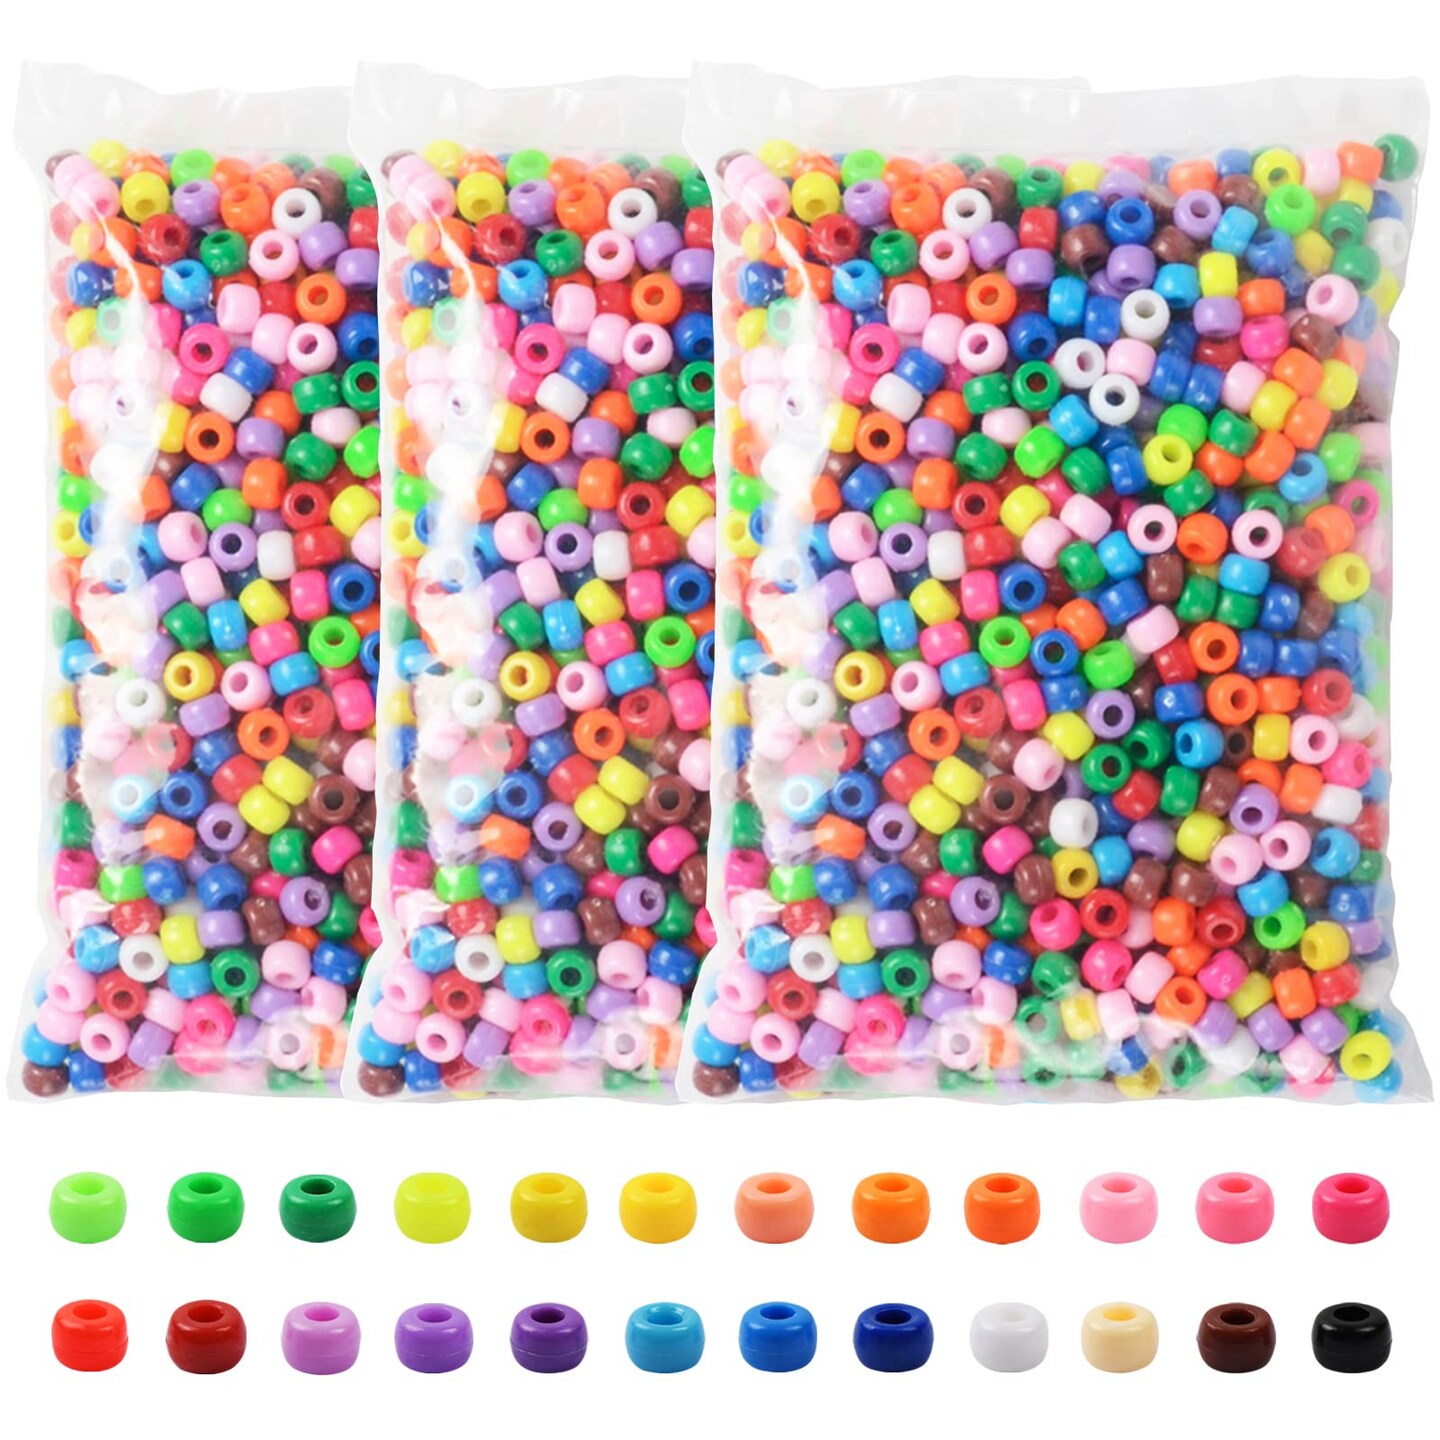 Multicolor Pony Bead Assortment by Creatology | Michaels